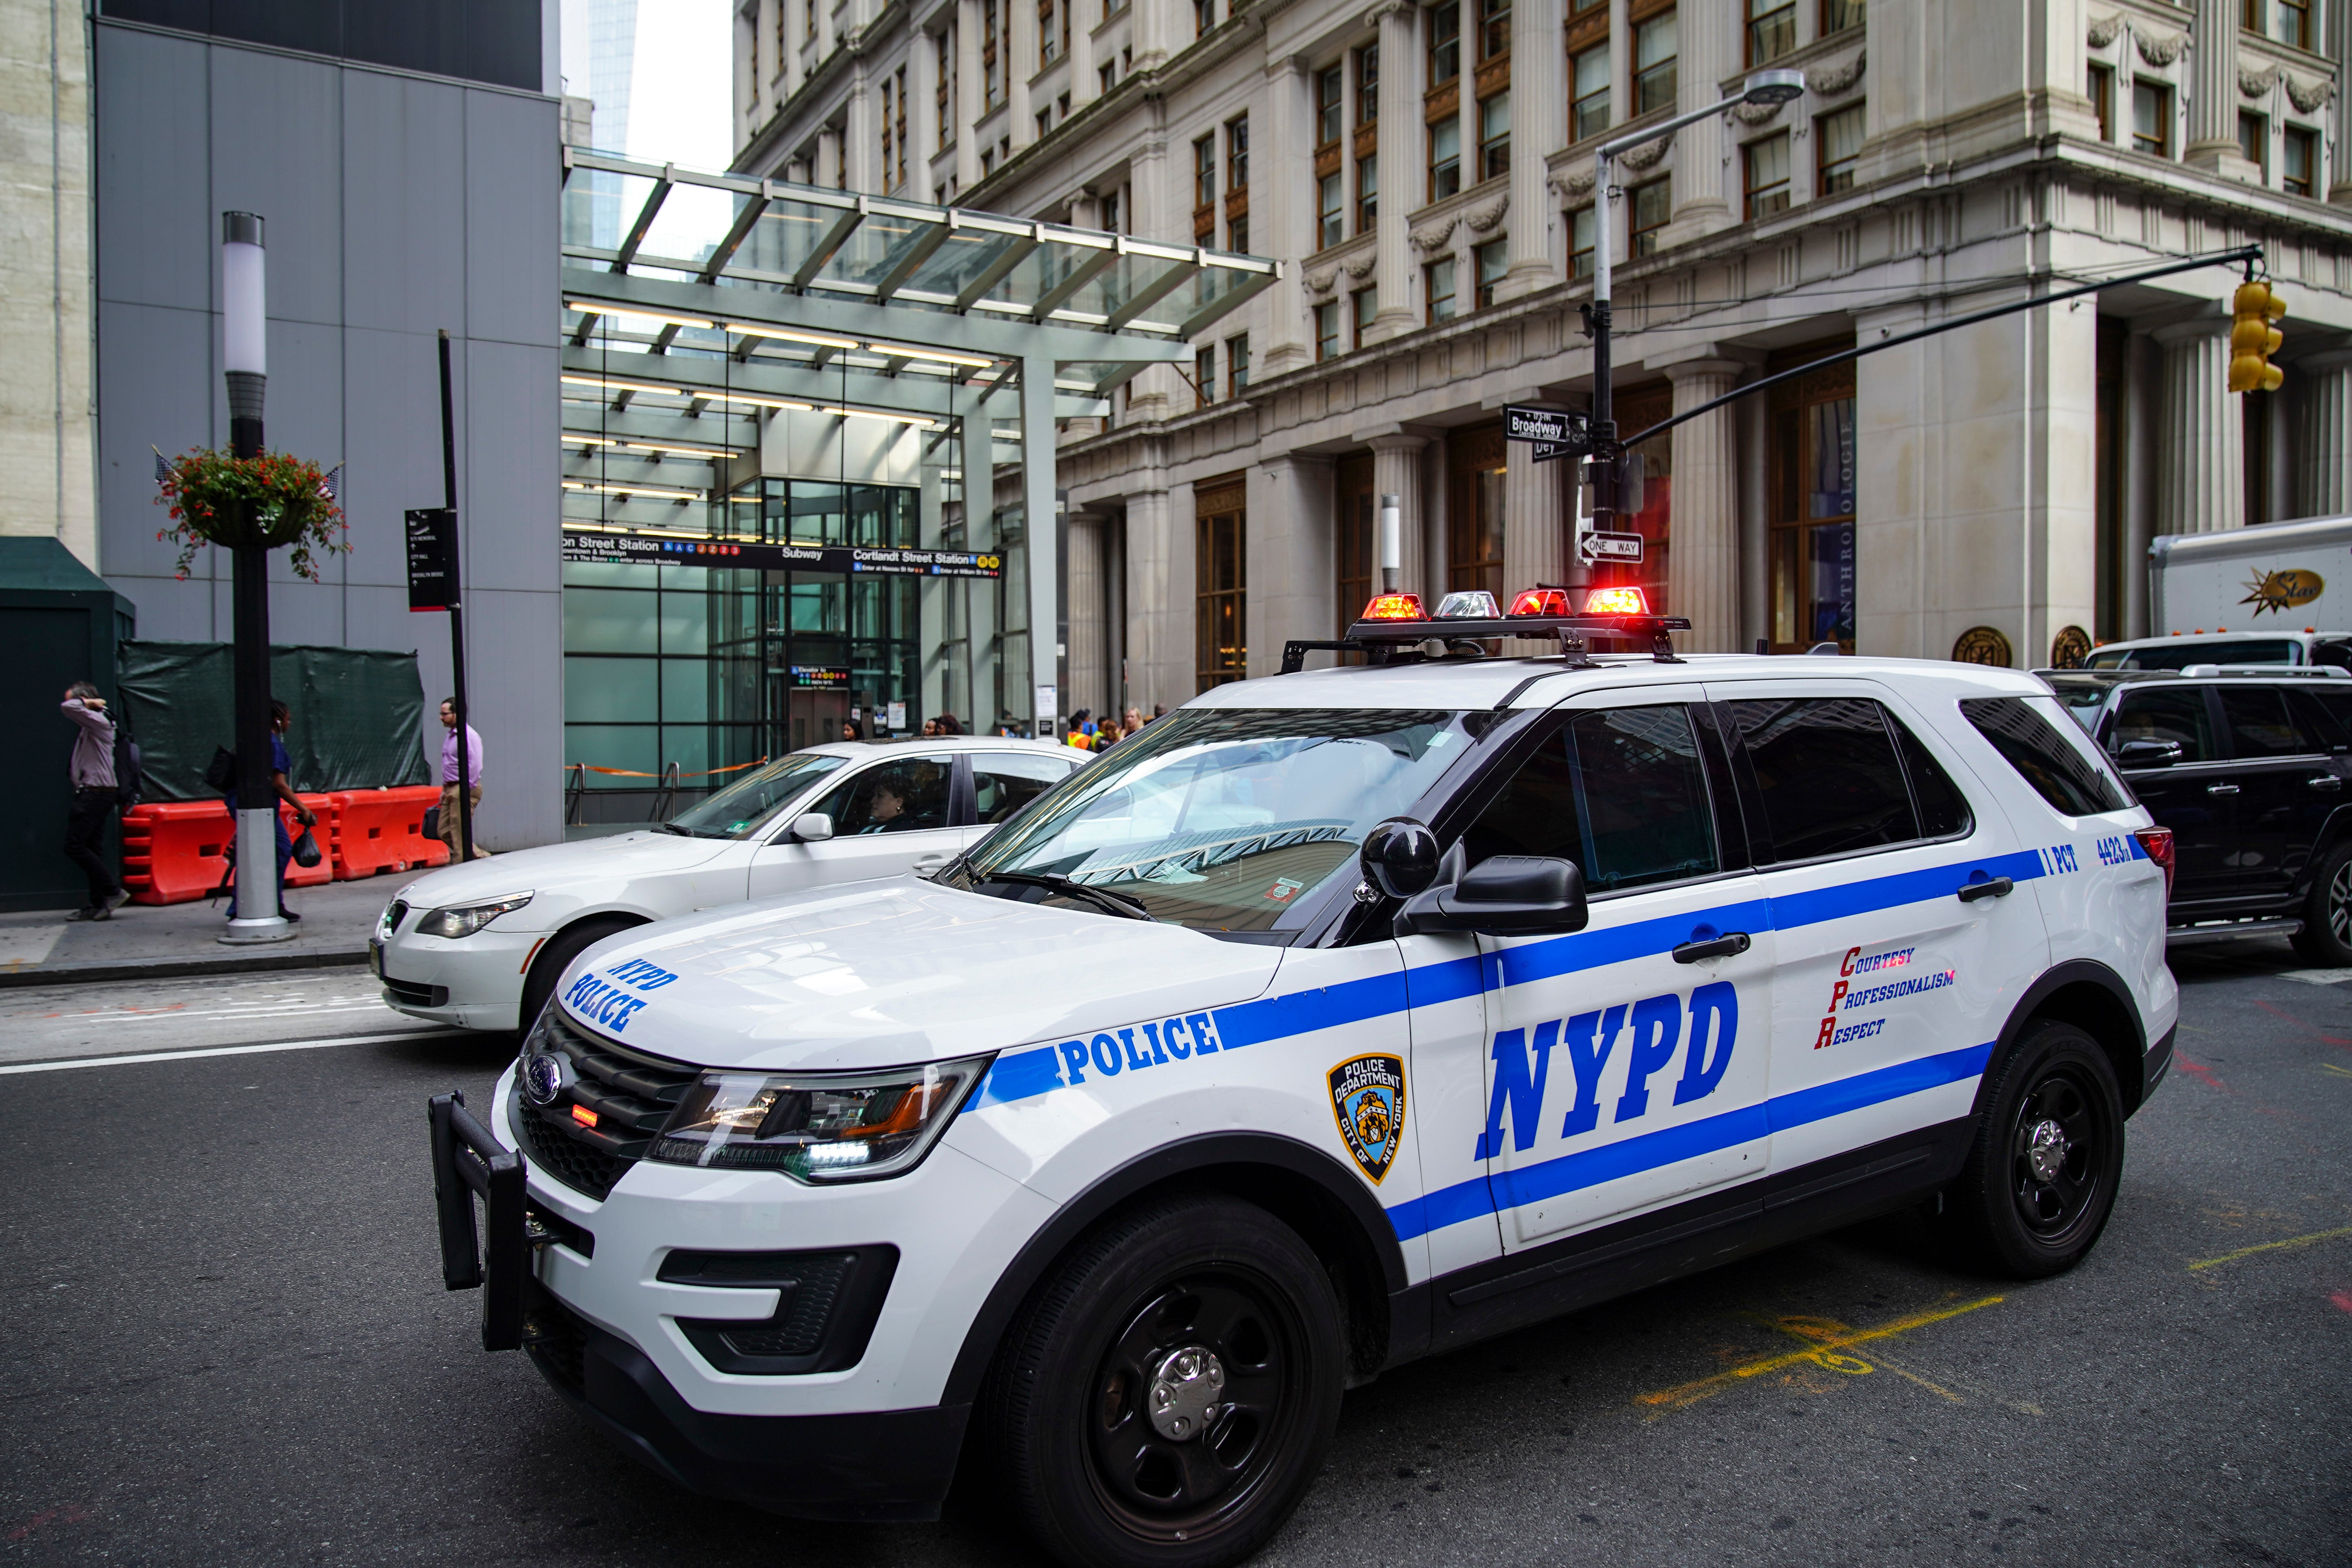 NYPD police vehicles respond near the scene of a suspicious package near the Fulton Street subway station in Lower Manhattan on August 16, 2019 in New York City.